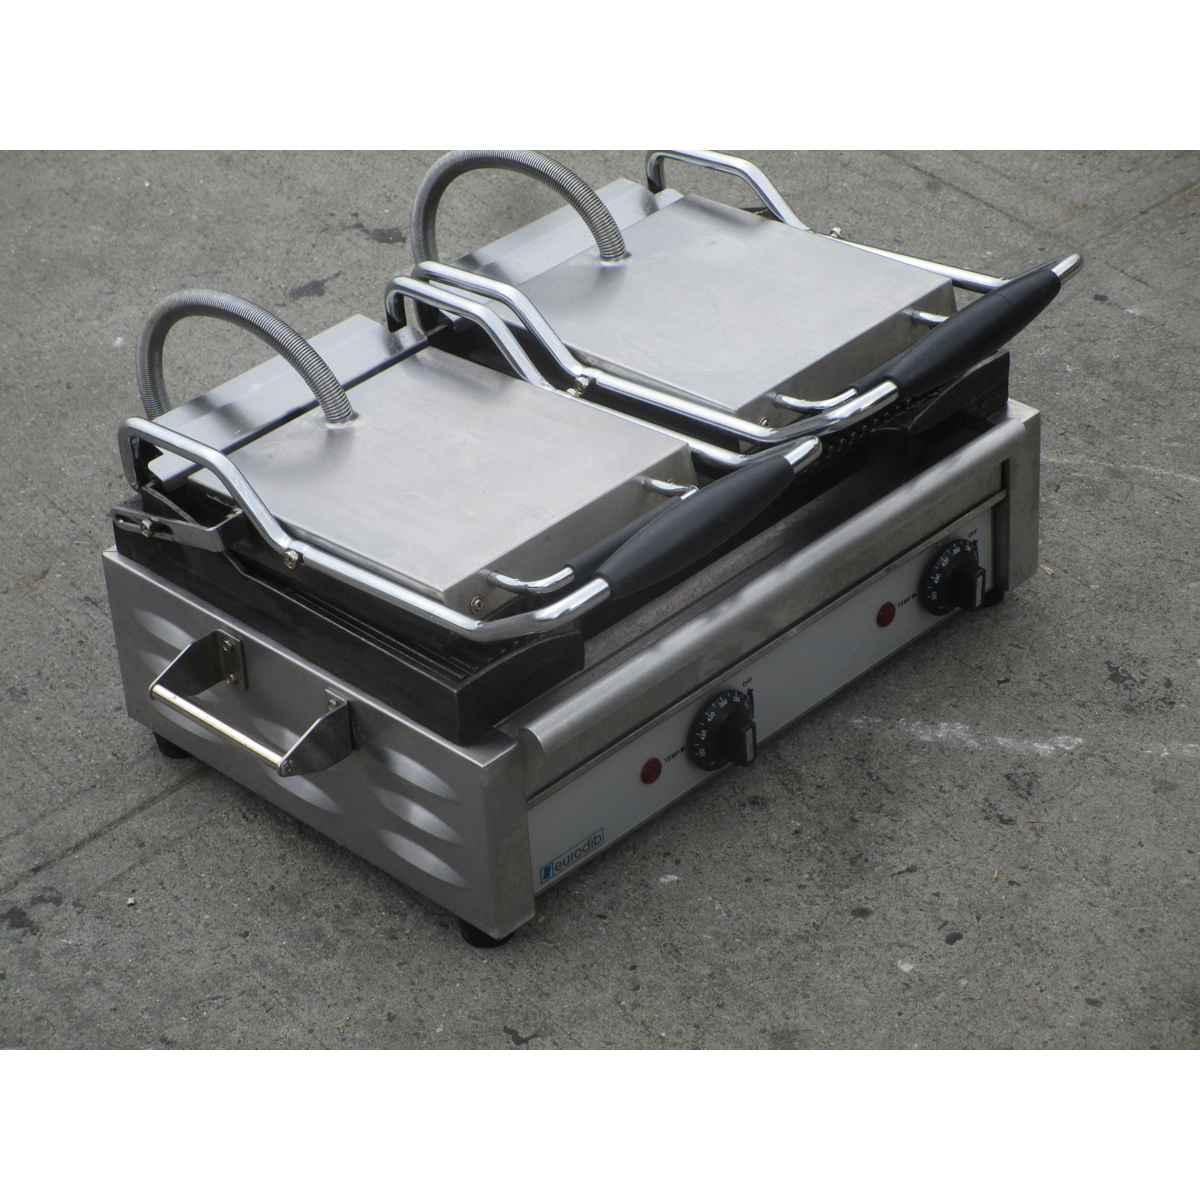 Eurodib SFE02365-240 17" x 10" Double Panini Grill with Grooved Plates, Used Great Condition image 1